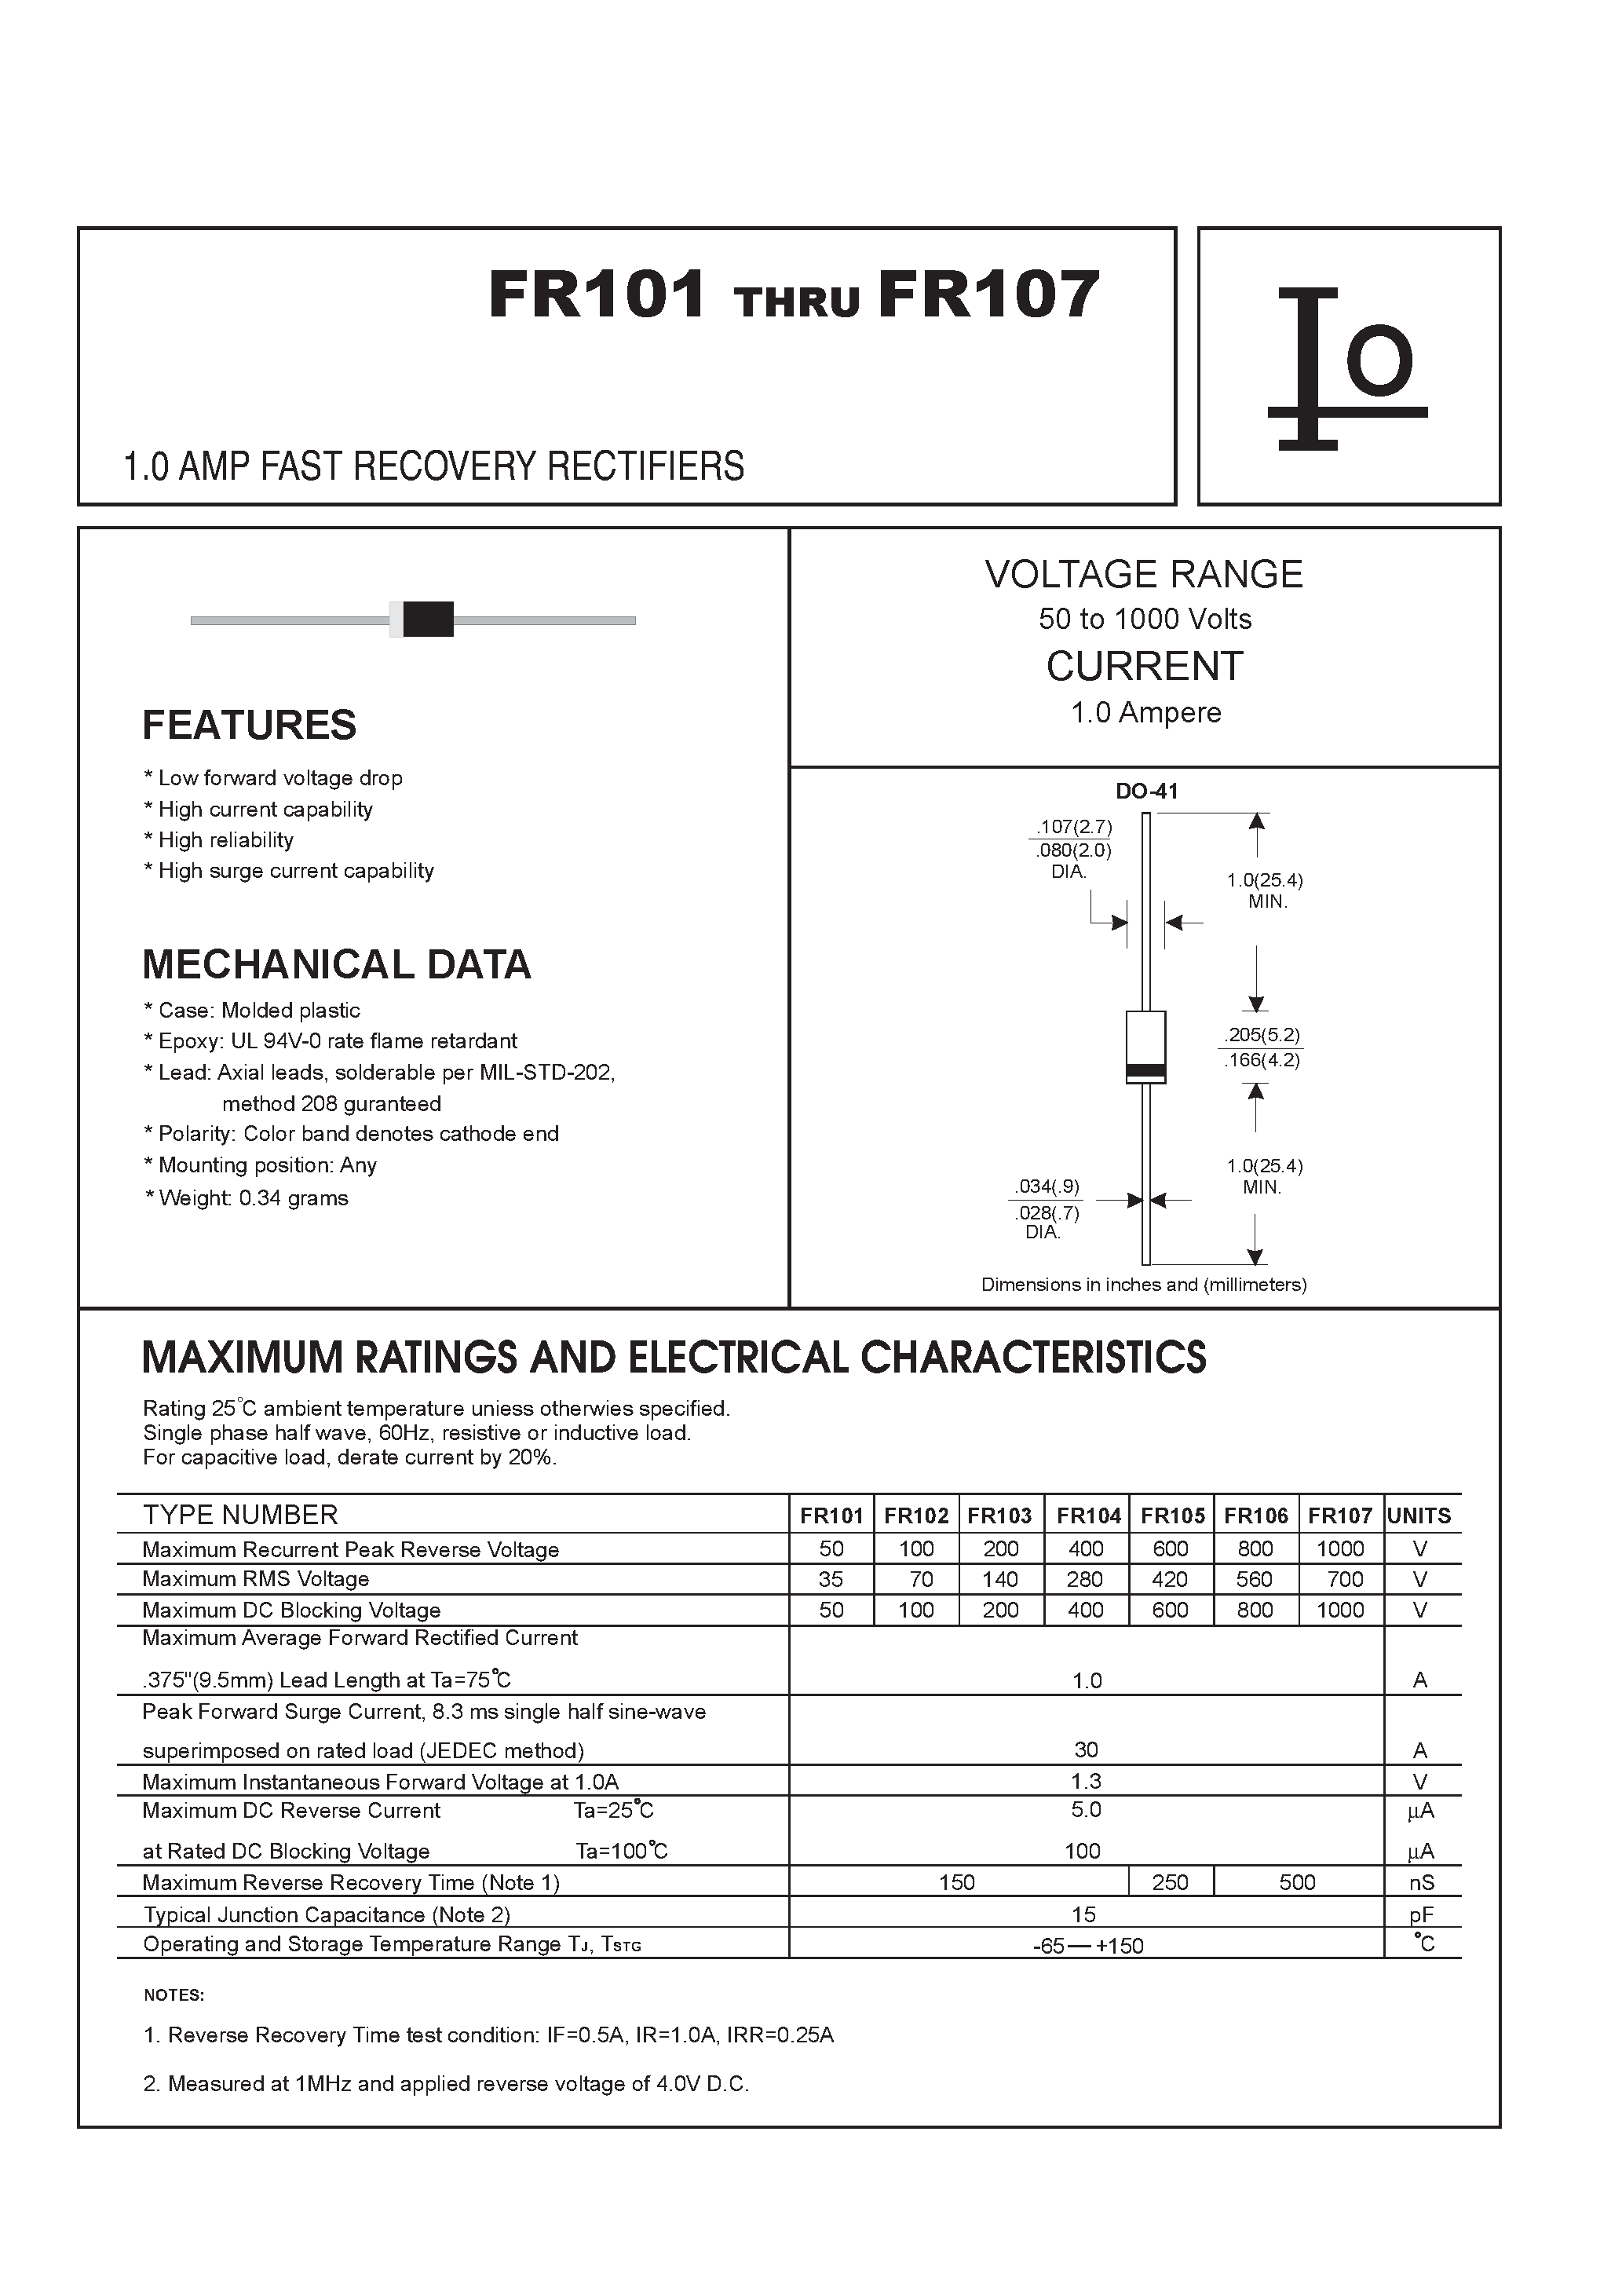 Datasheet FR101 - 1.0 AMP FAST RECOVERY RECTIFIERS page 1